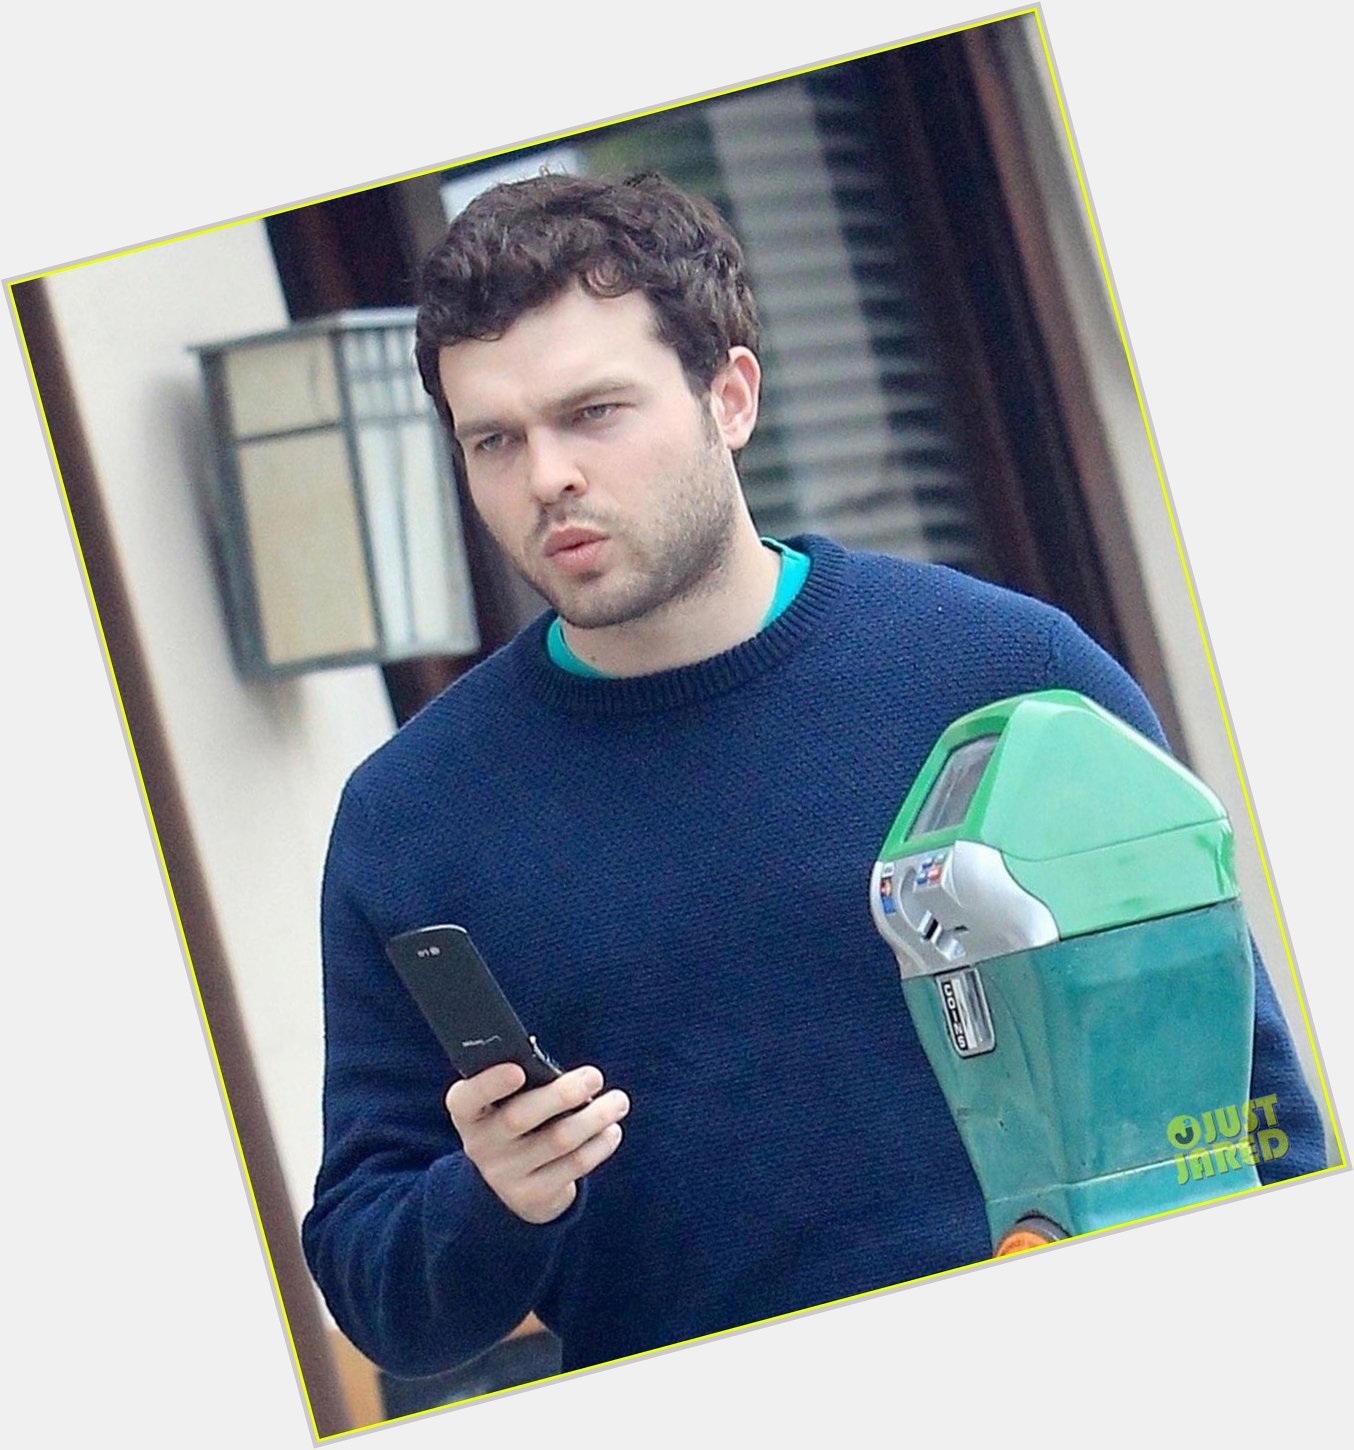 Happy Birthday to the man who run this account from his flip phone, Alden Ehrenreich!!! See him messageing below 